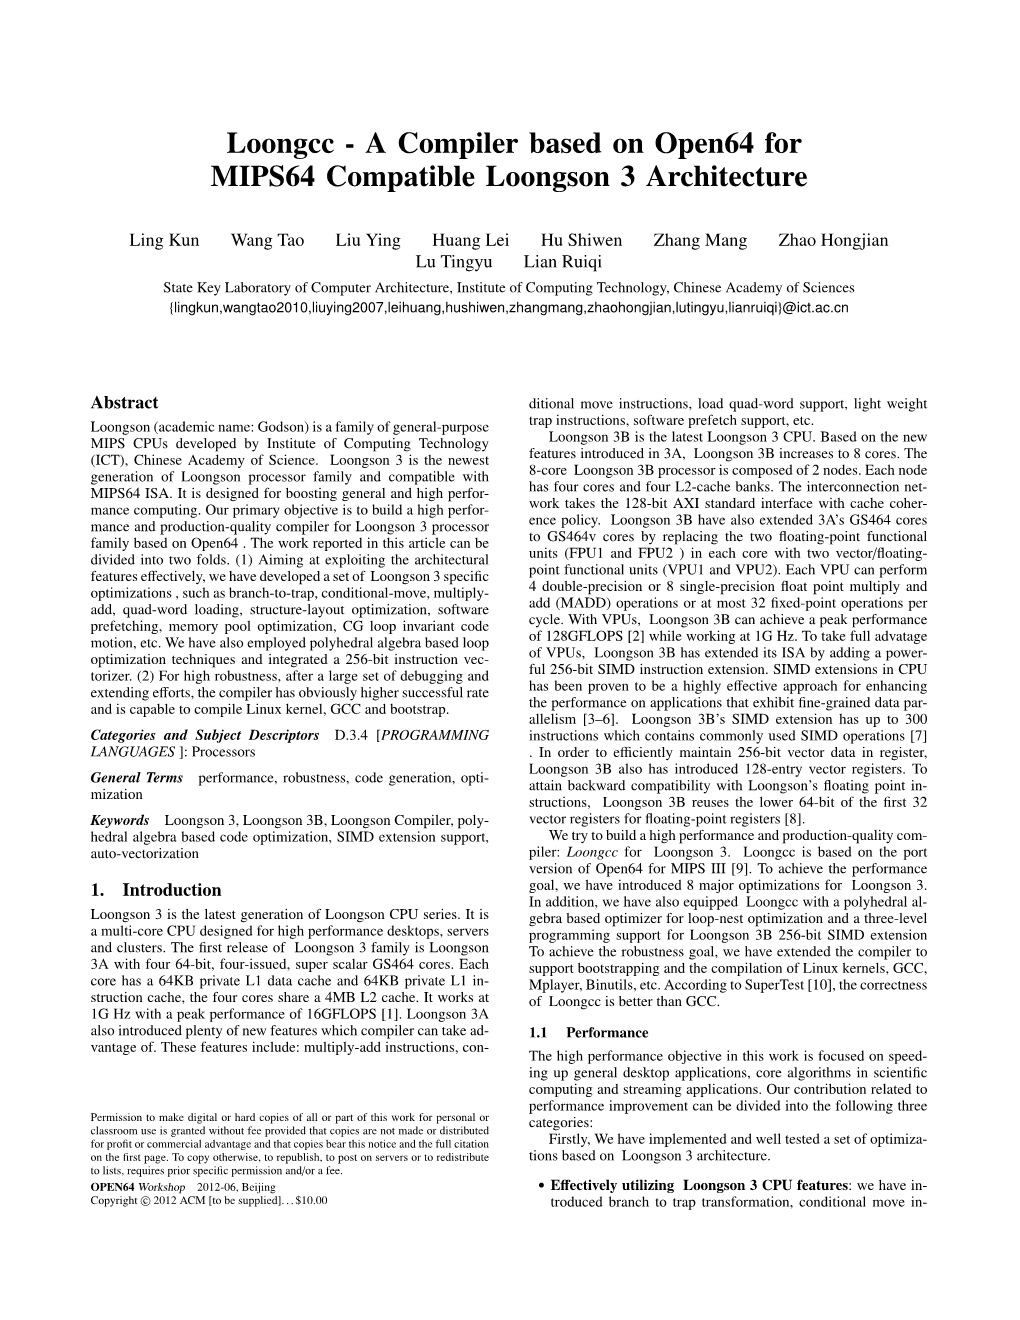 Loongcc - a Compiler Based on Open64 for MIPS64 Compatible Loongson 3 Architecture